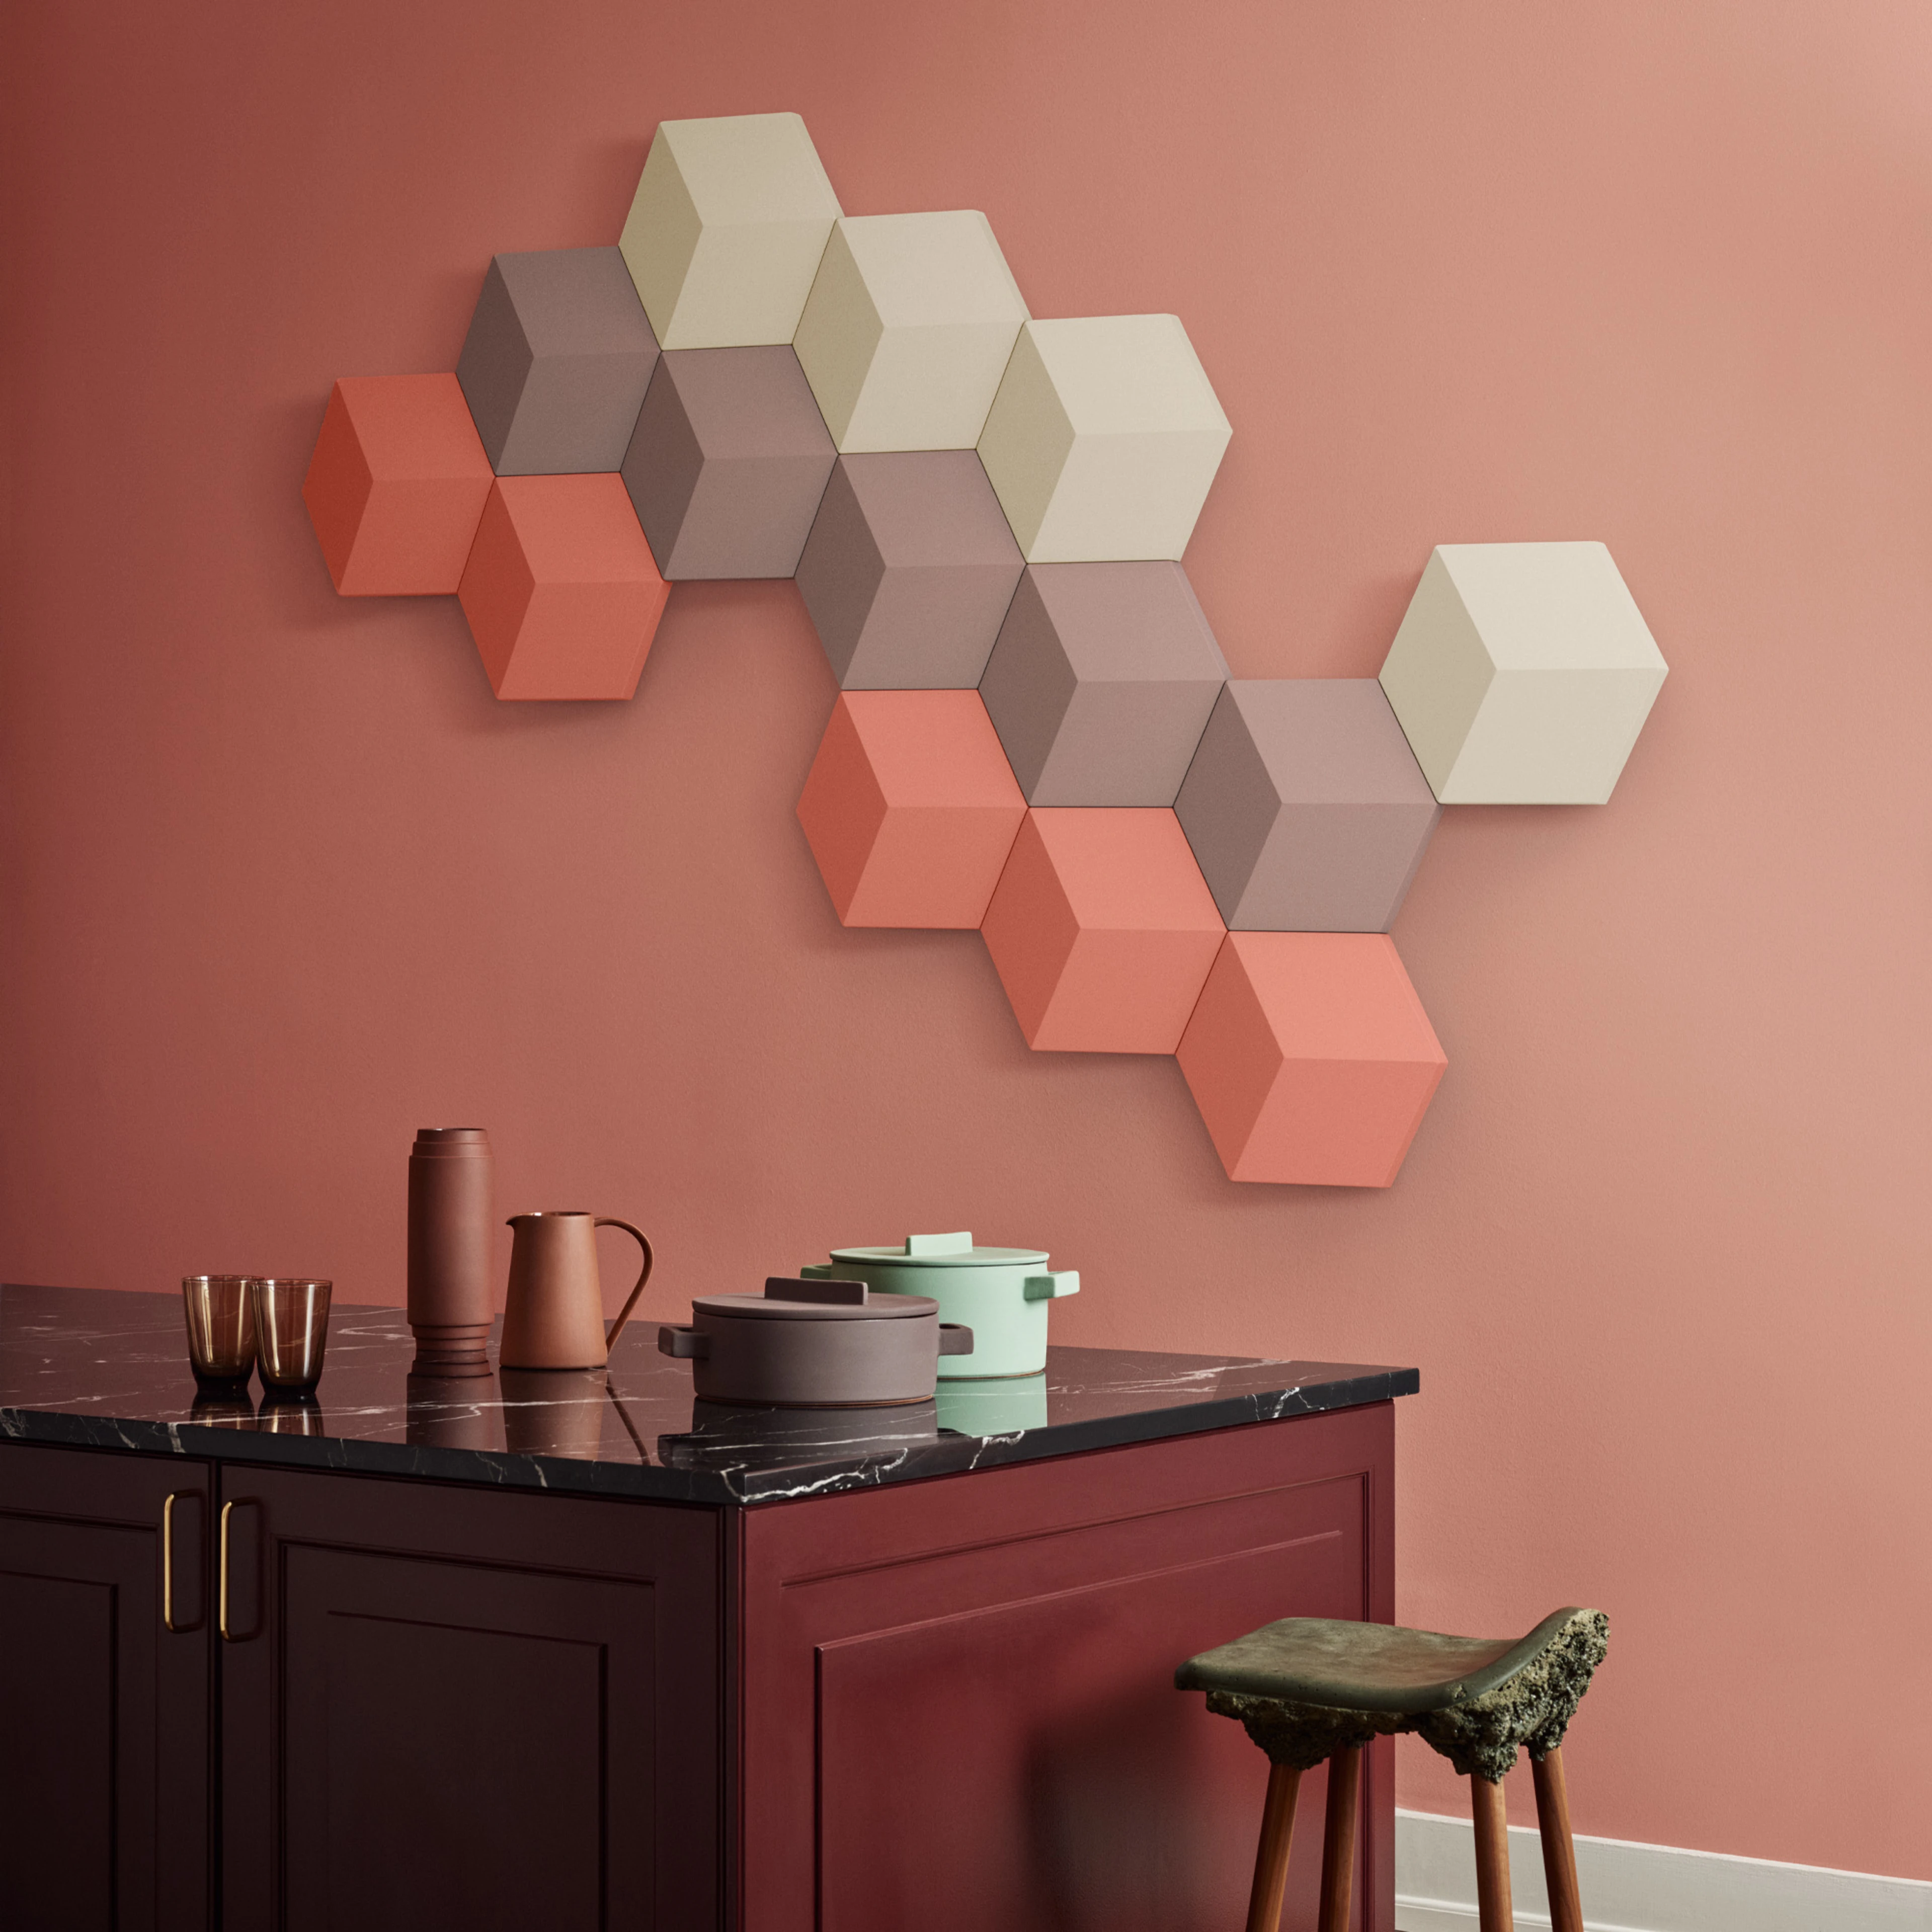 Image of Beosound Shape on a wall in a kitchen